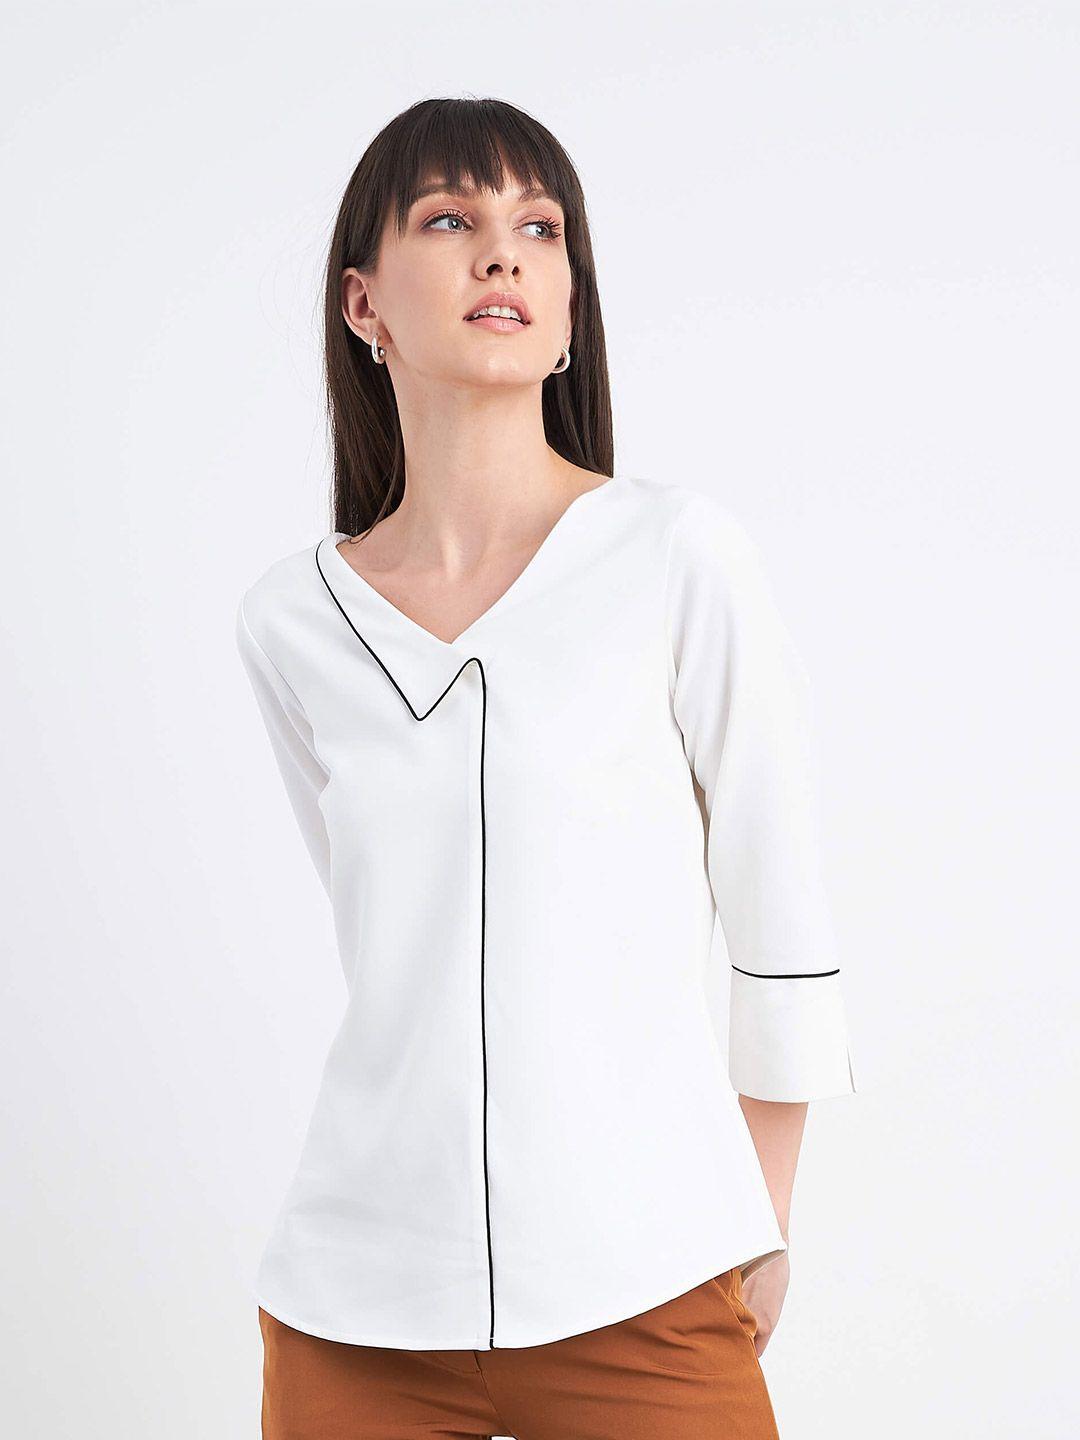 salt attire v-neck contrast piping detail shirt style top